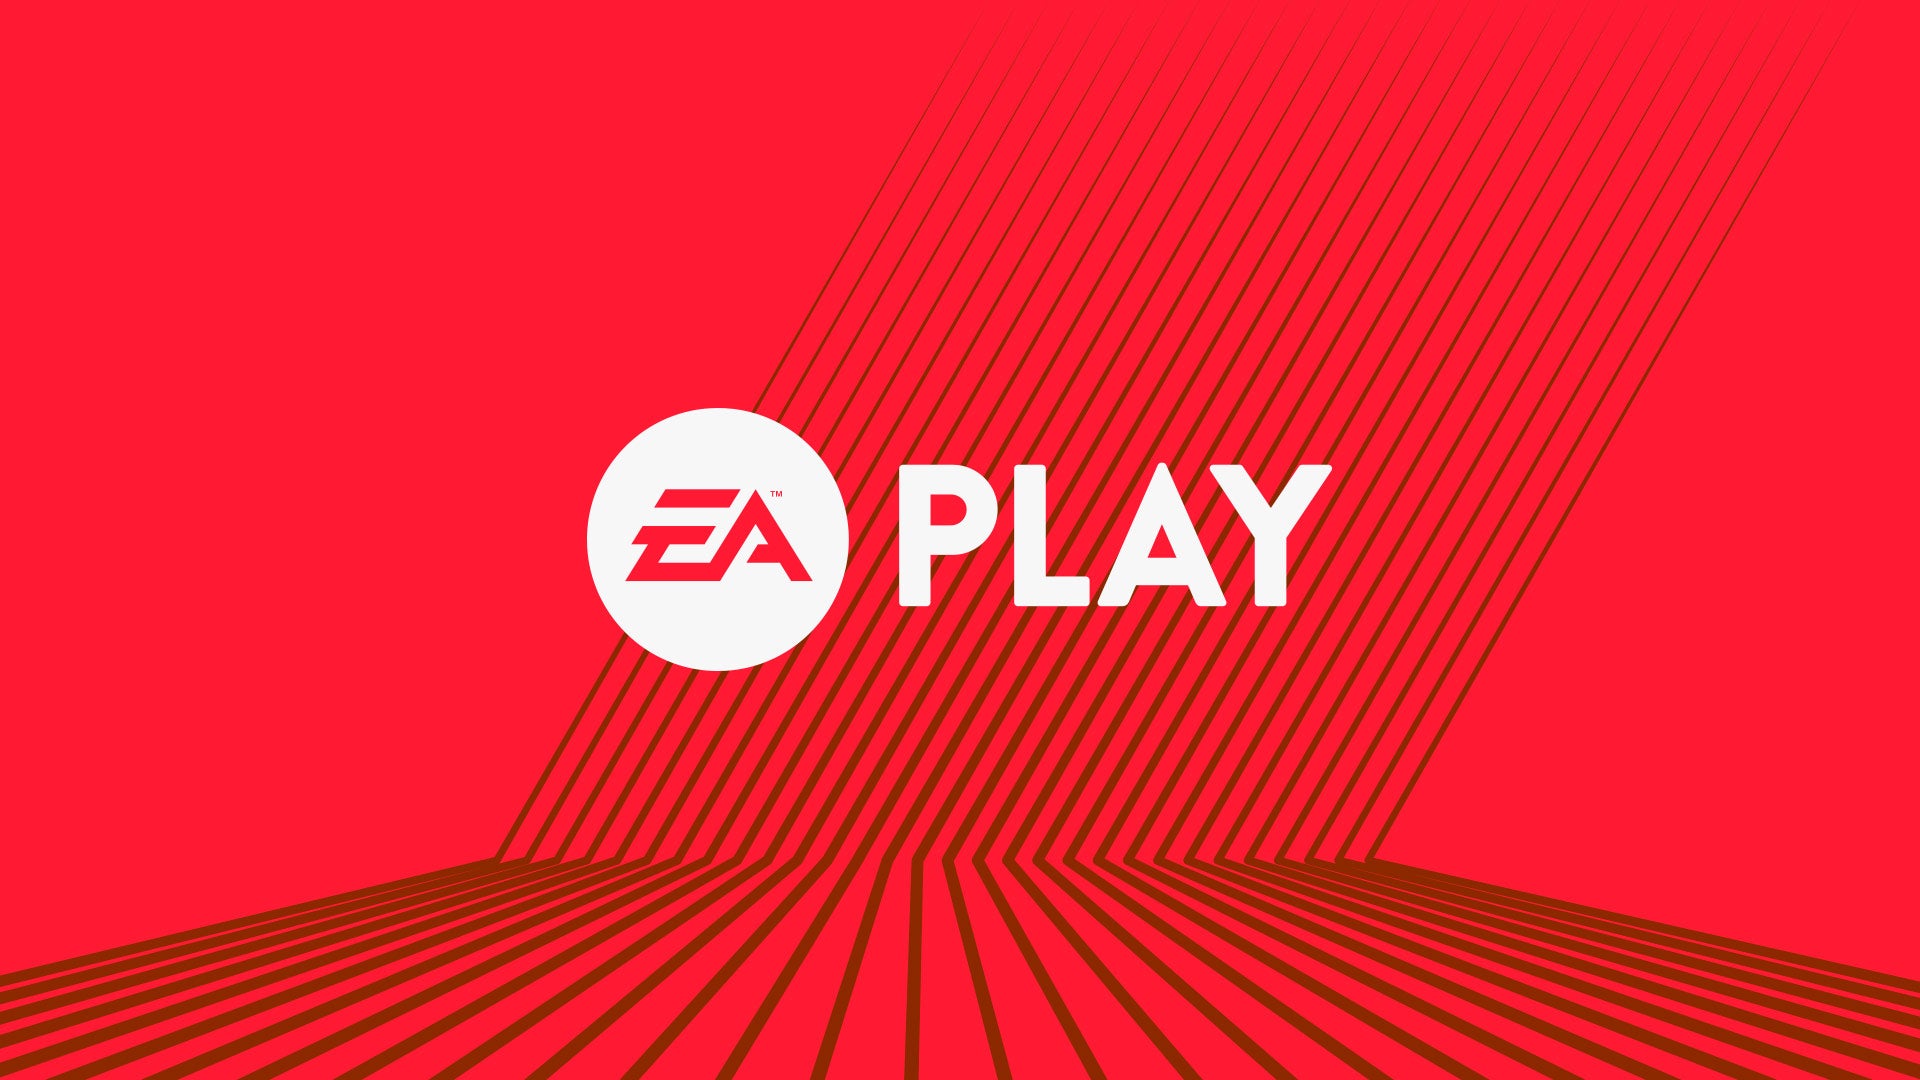 Image for EA Play 2019 will not feature a press conference at E3 this year